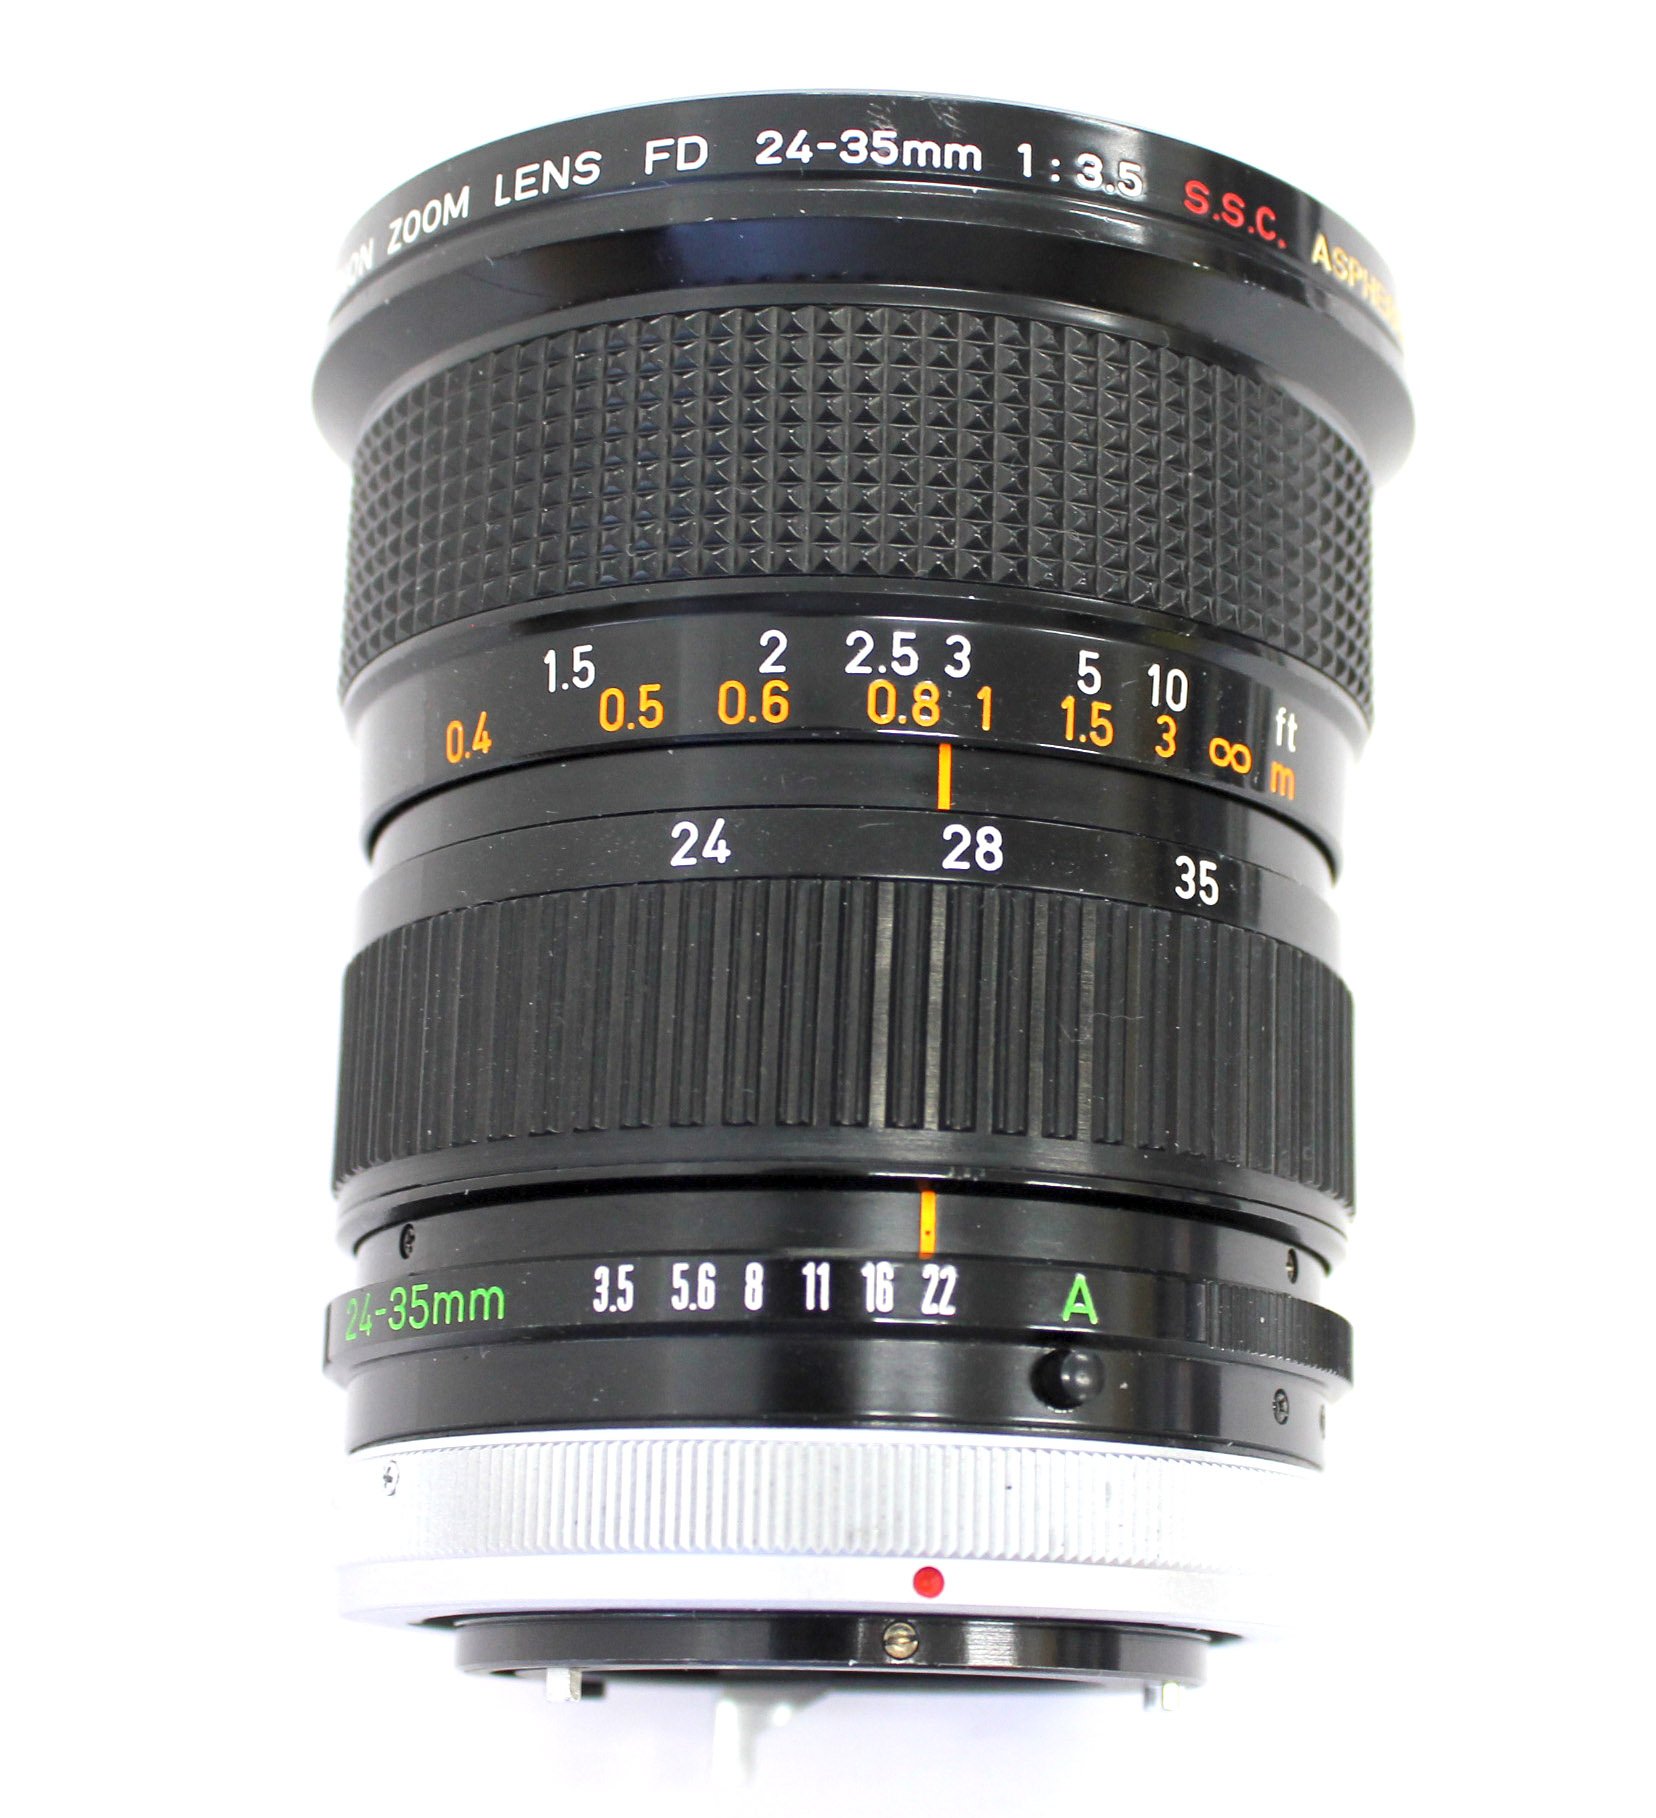 Canon FD 24-35mm F/3.5 S.S.C ssc Aspherical Zoom Lens from Japan